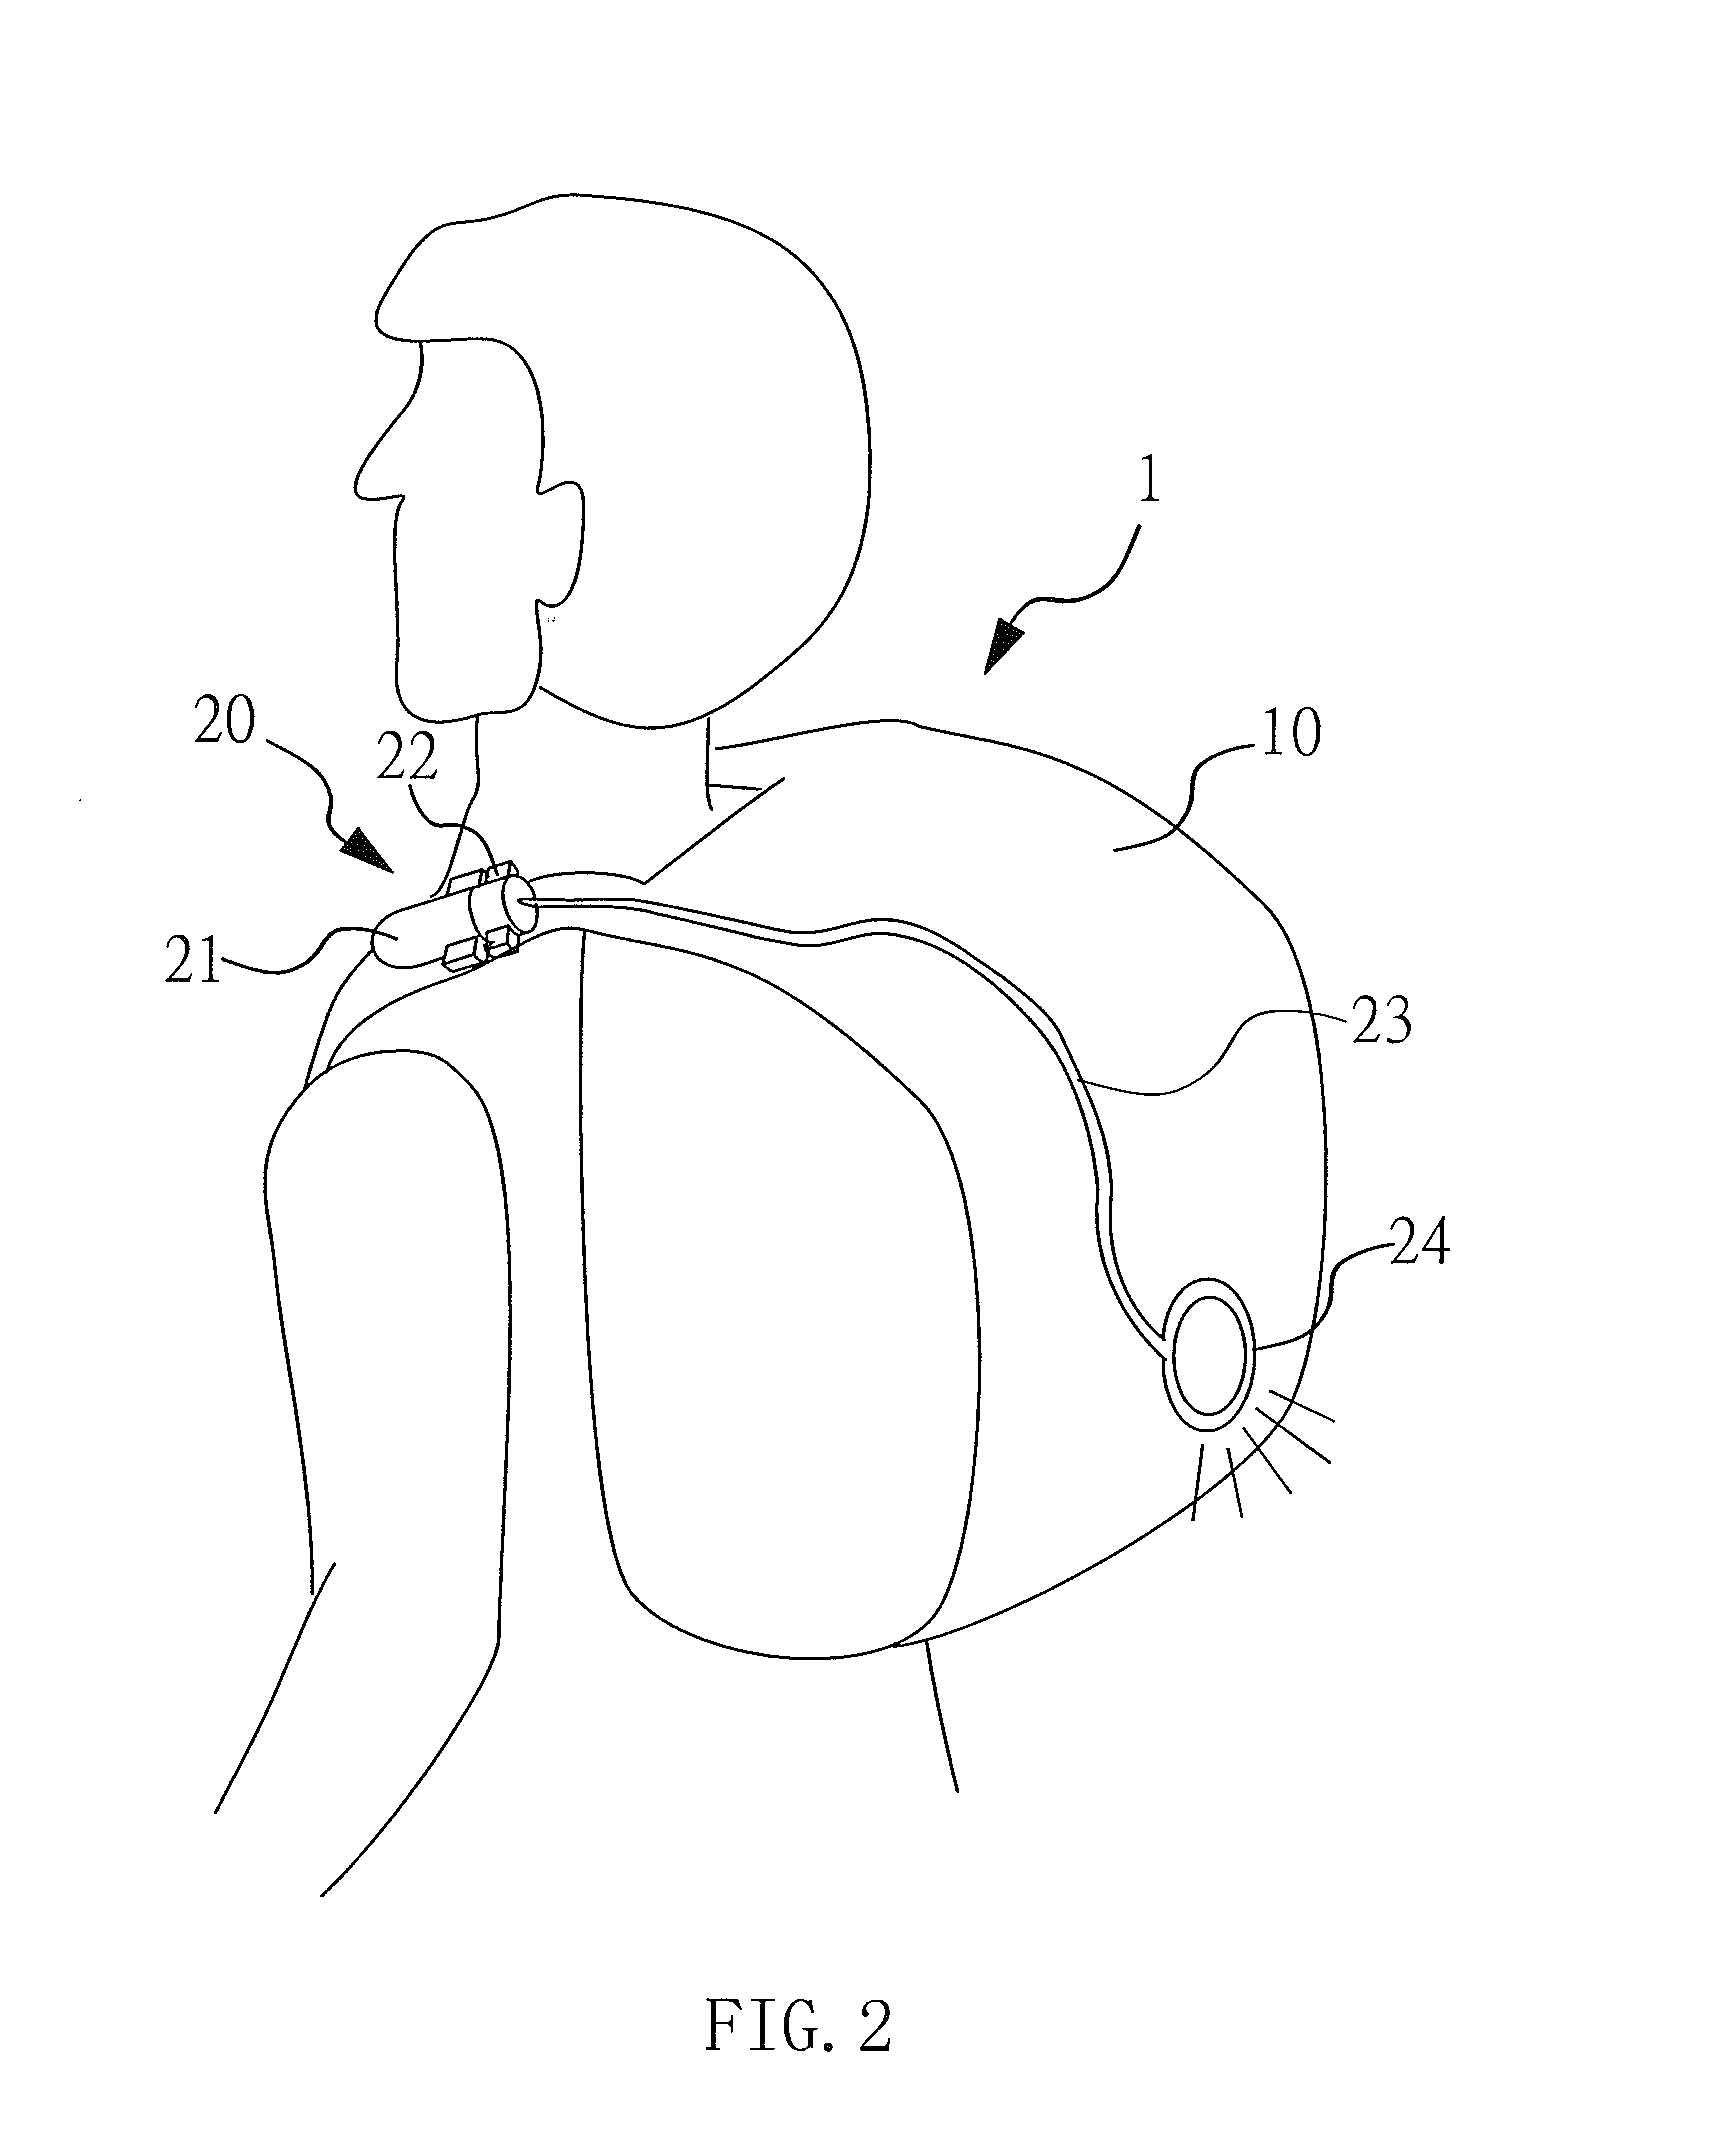 Detachable Lighting Source Device Having a Light Guiding Wire Set Equipped with a Detachable Lighting Source